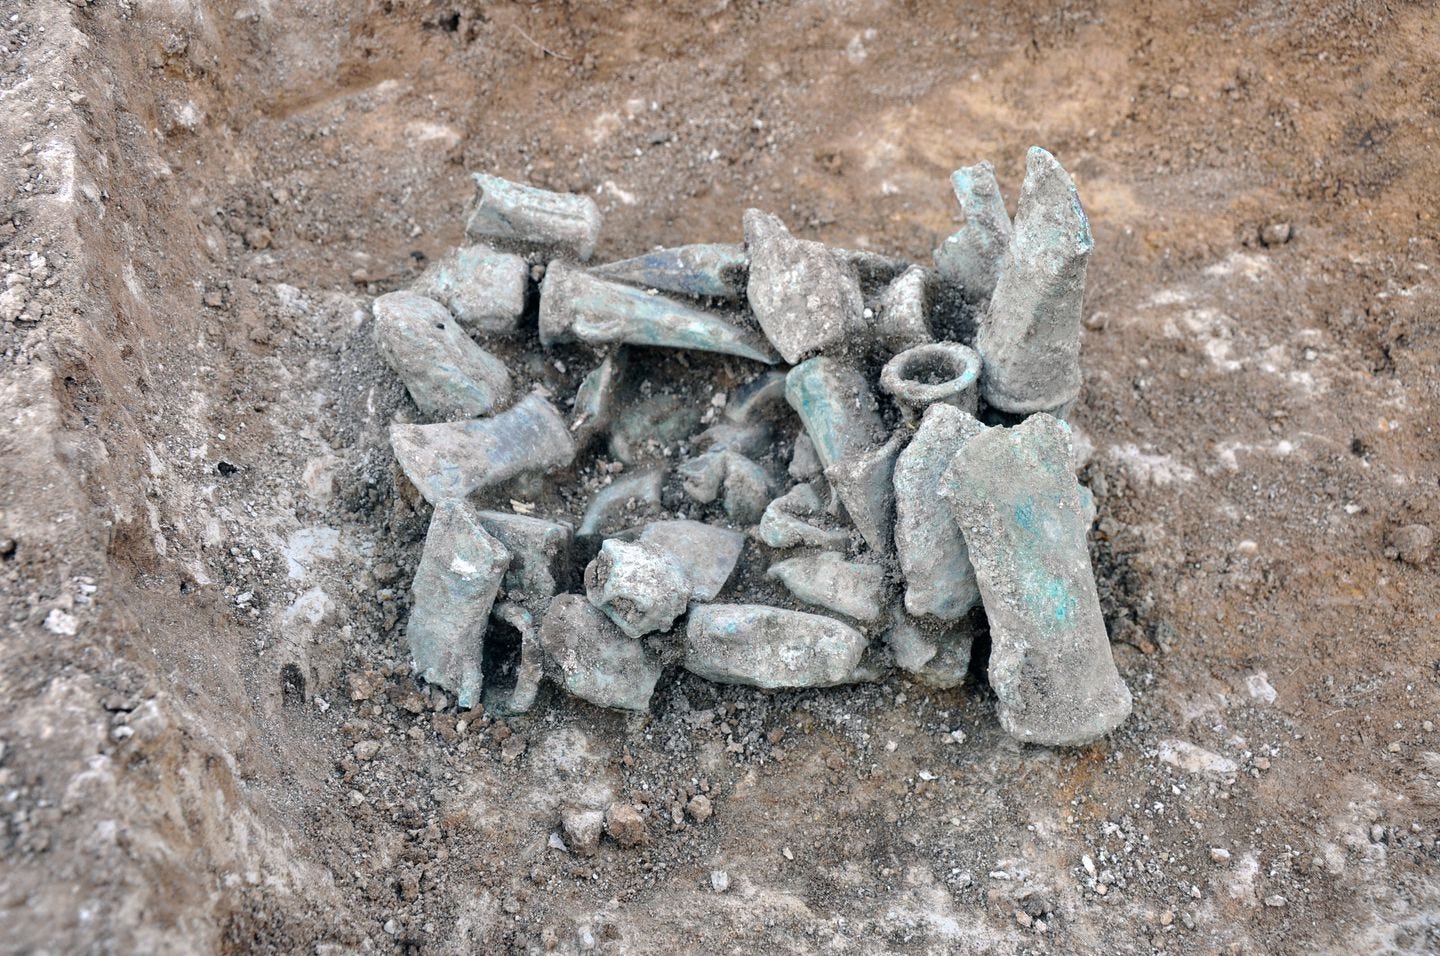 A photo provided by Oxford Archaeology East showed items from one of two Bronze Age hoards, totaling around 200 artifacts, that were found near Royston, England.